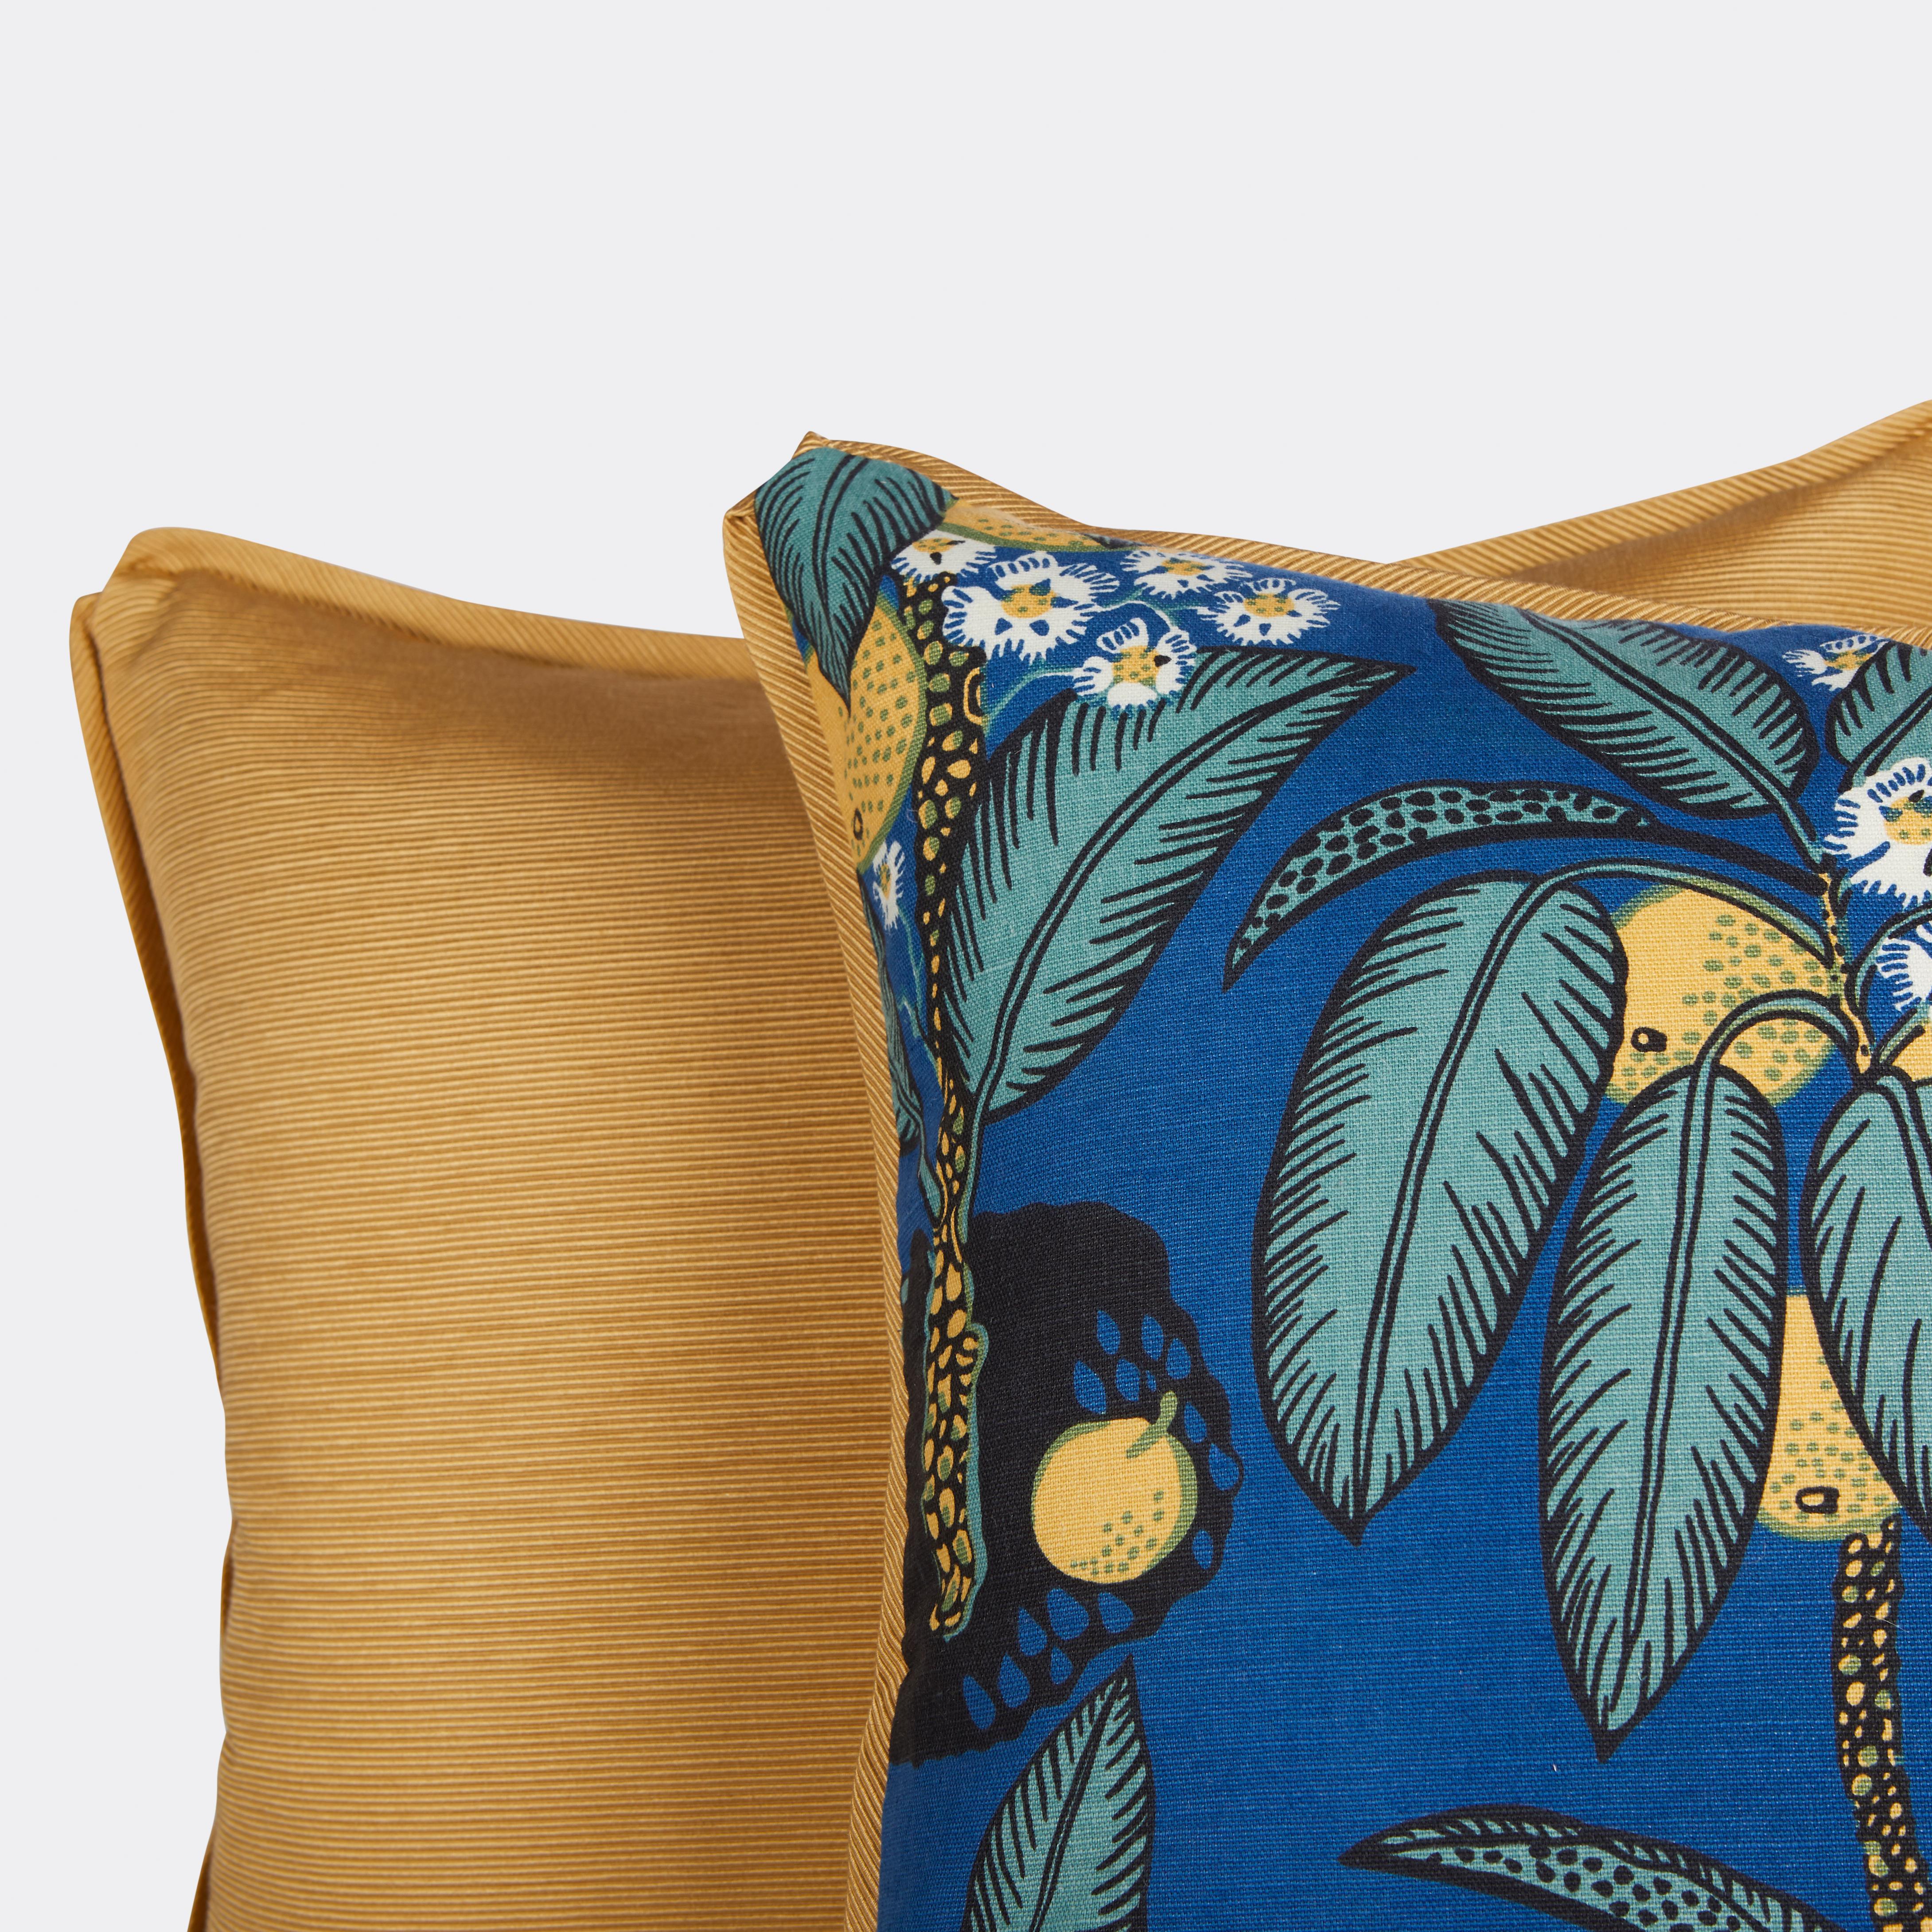 Pair of Rectangular Josef Frank Cushions in the Notturno Pattern In New Condition For Sale In New York, NY